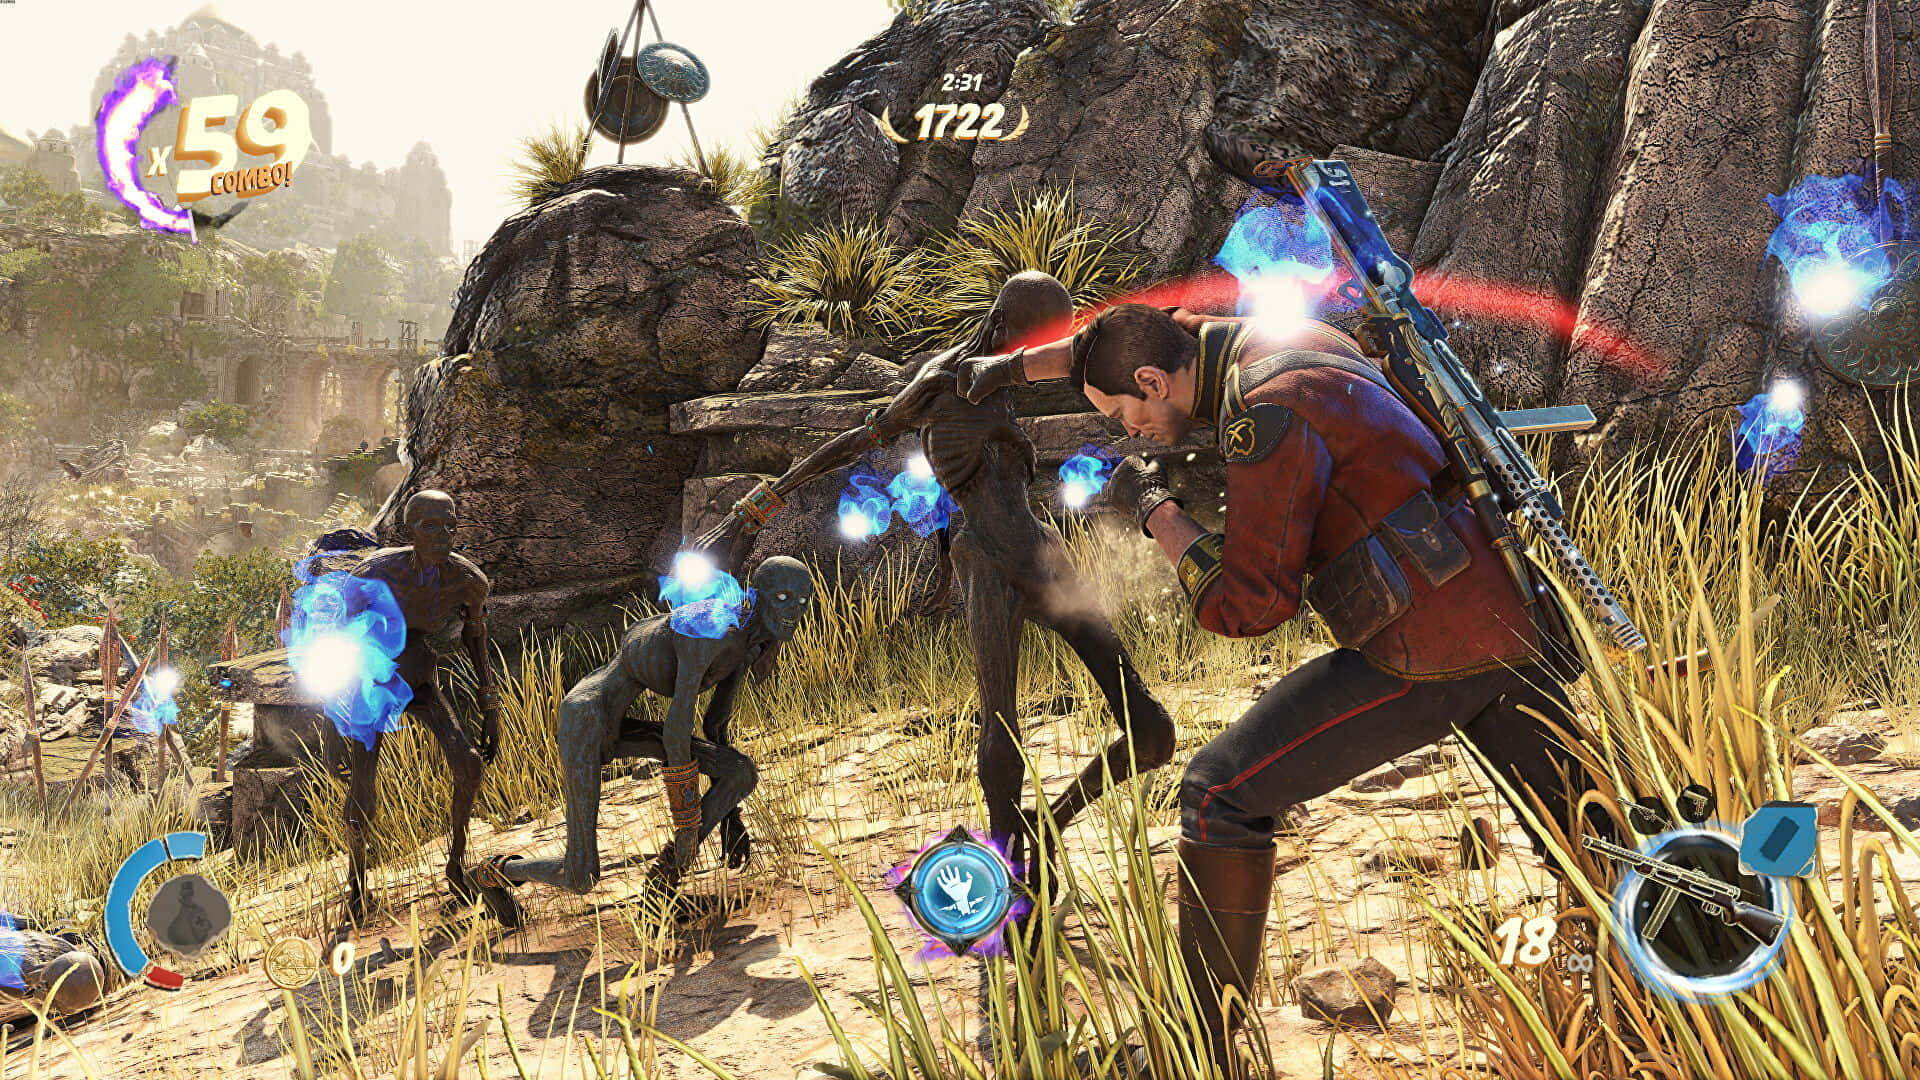 A Screenshot Of A Game With Several People In It